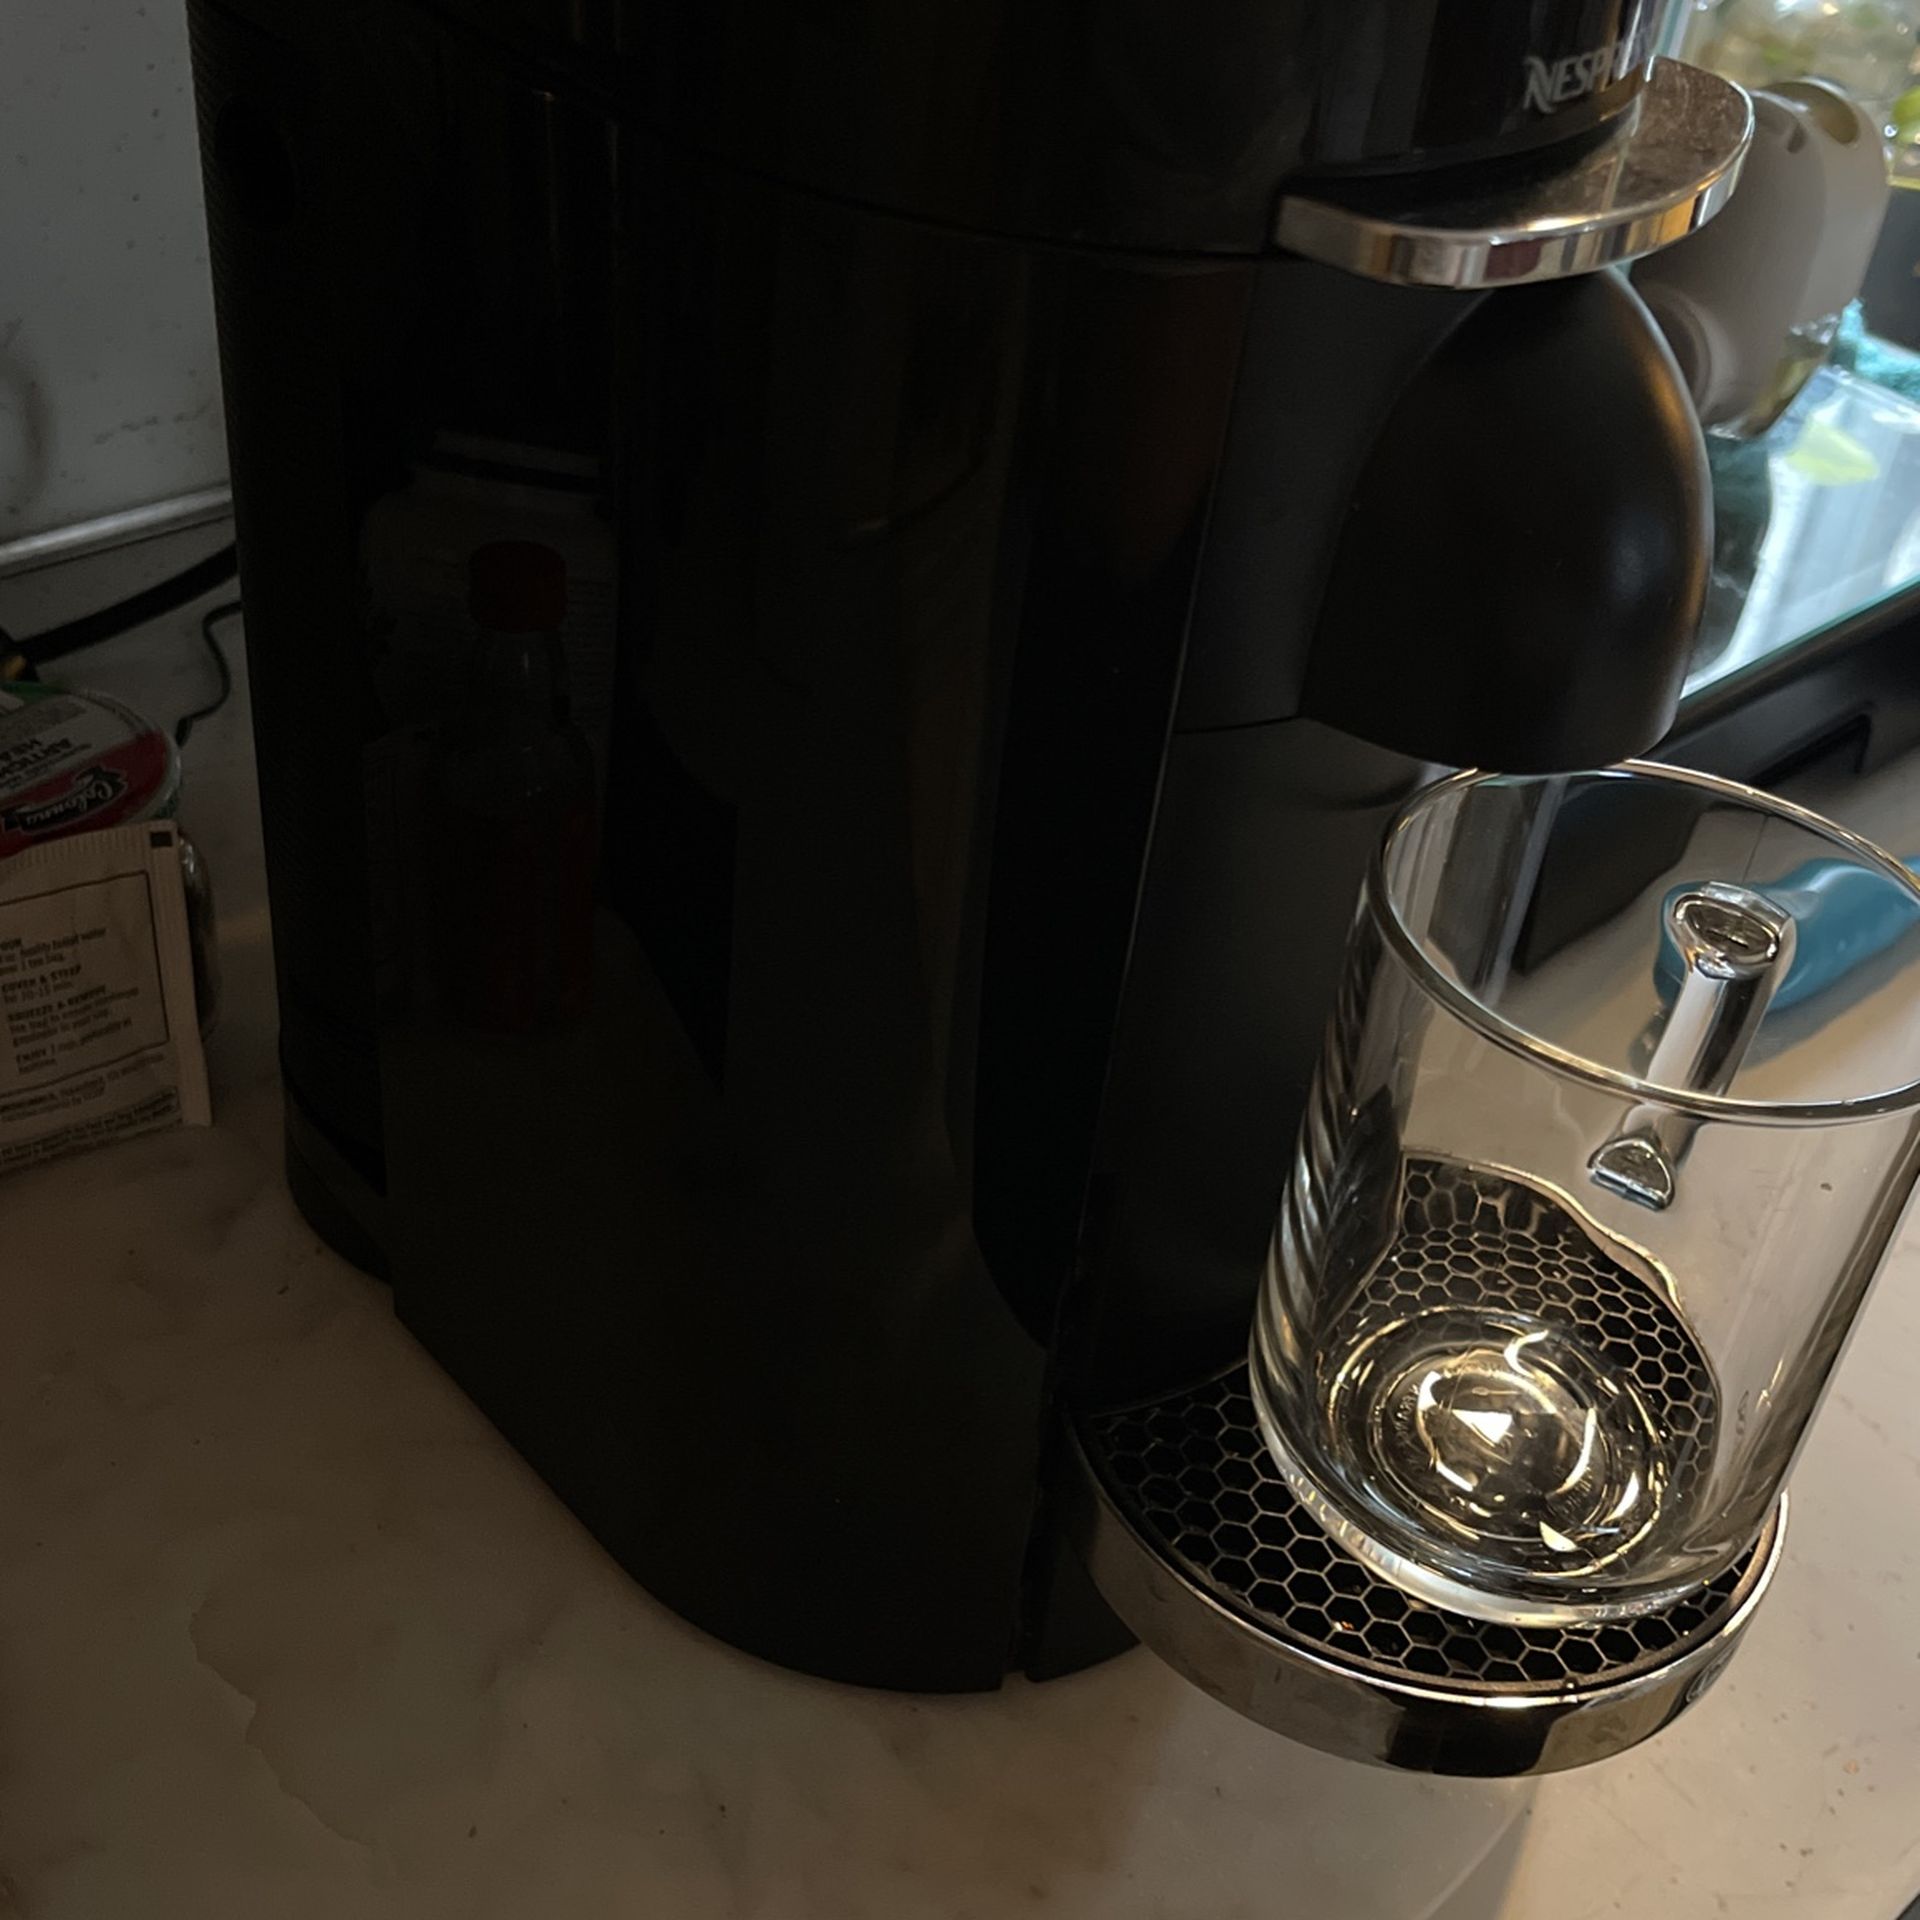 West Bend 100 Cup Coffee Maker for Sale in Reidsville, NC - OfferUp